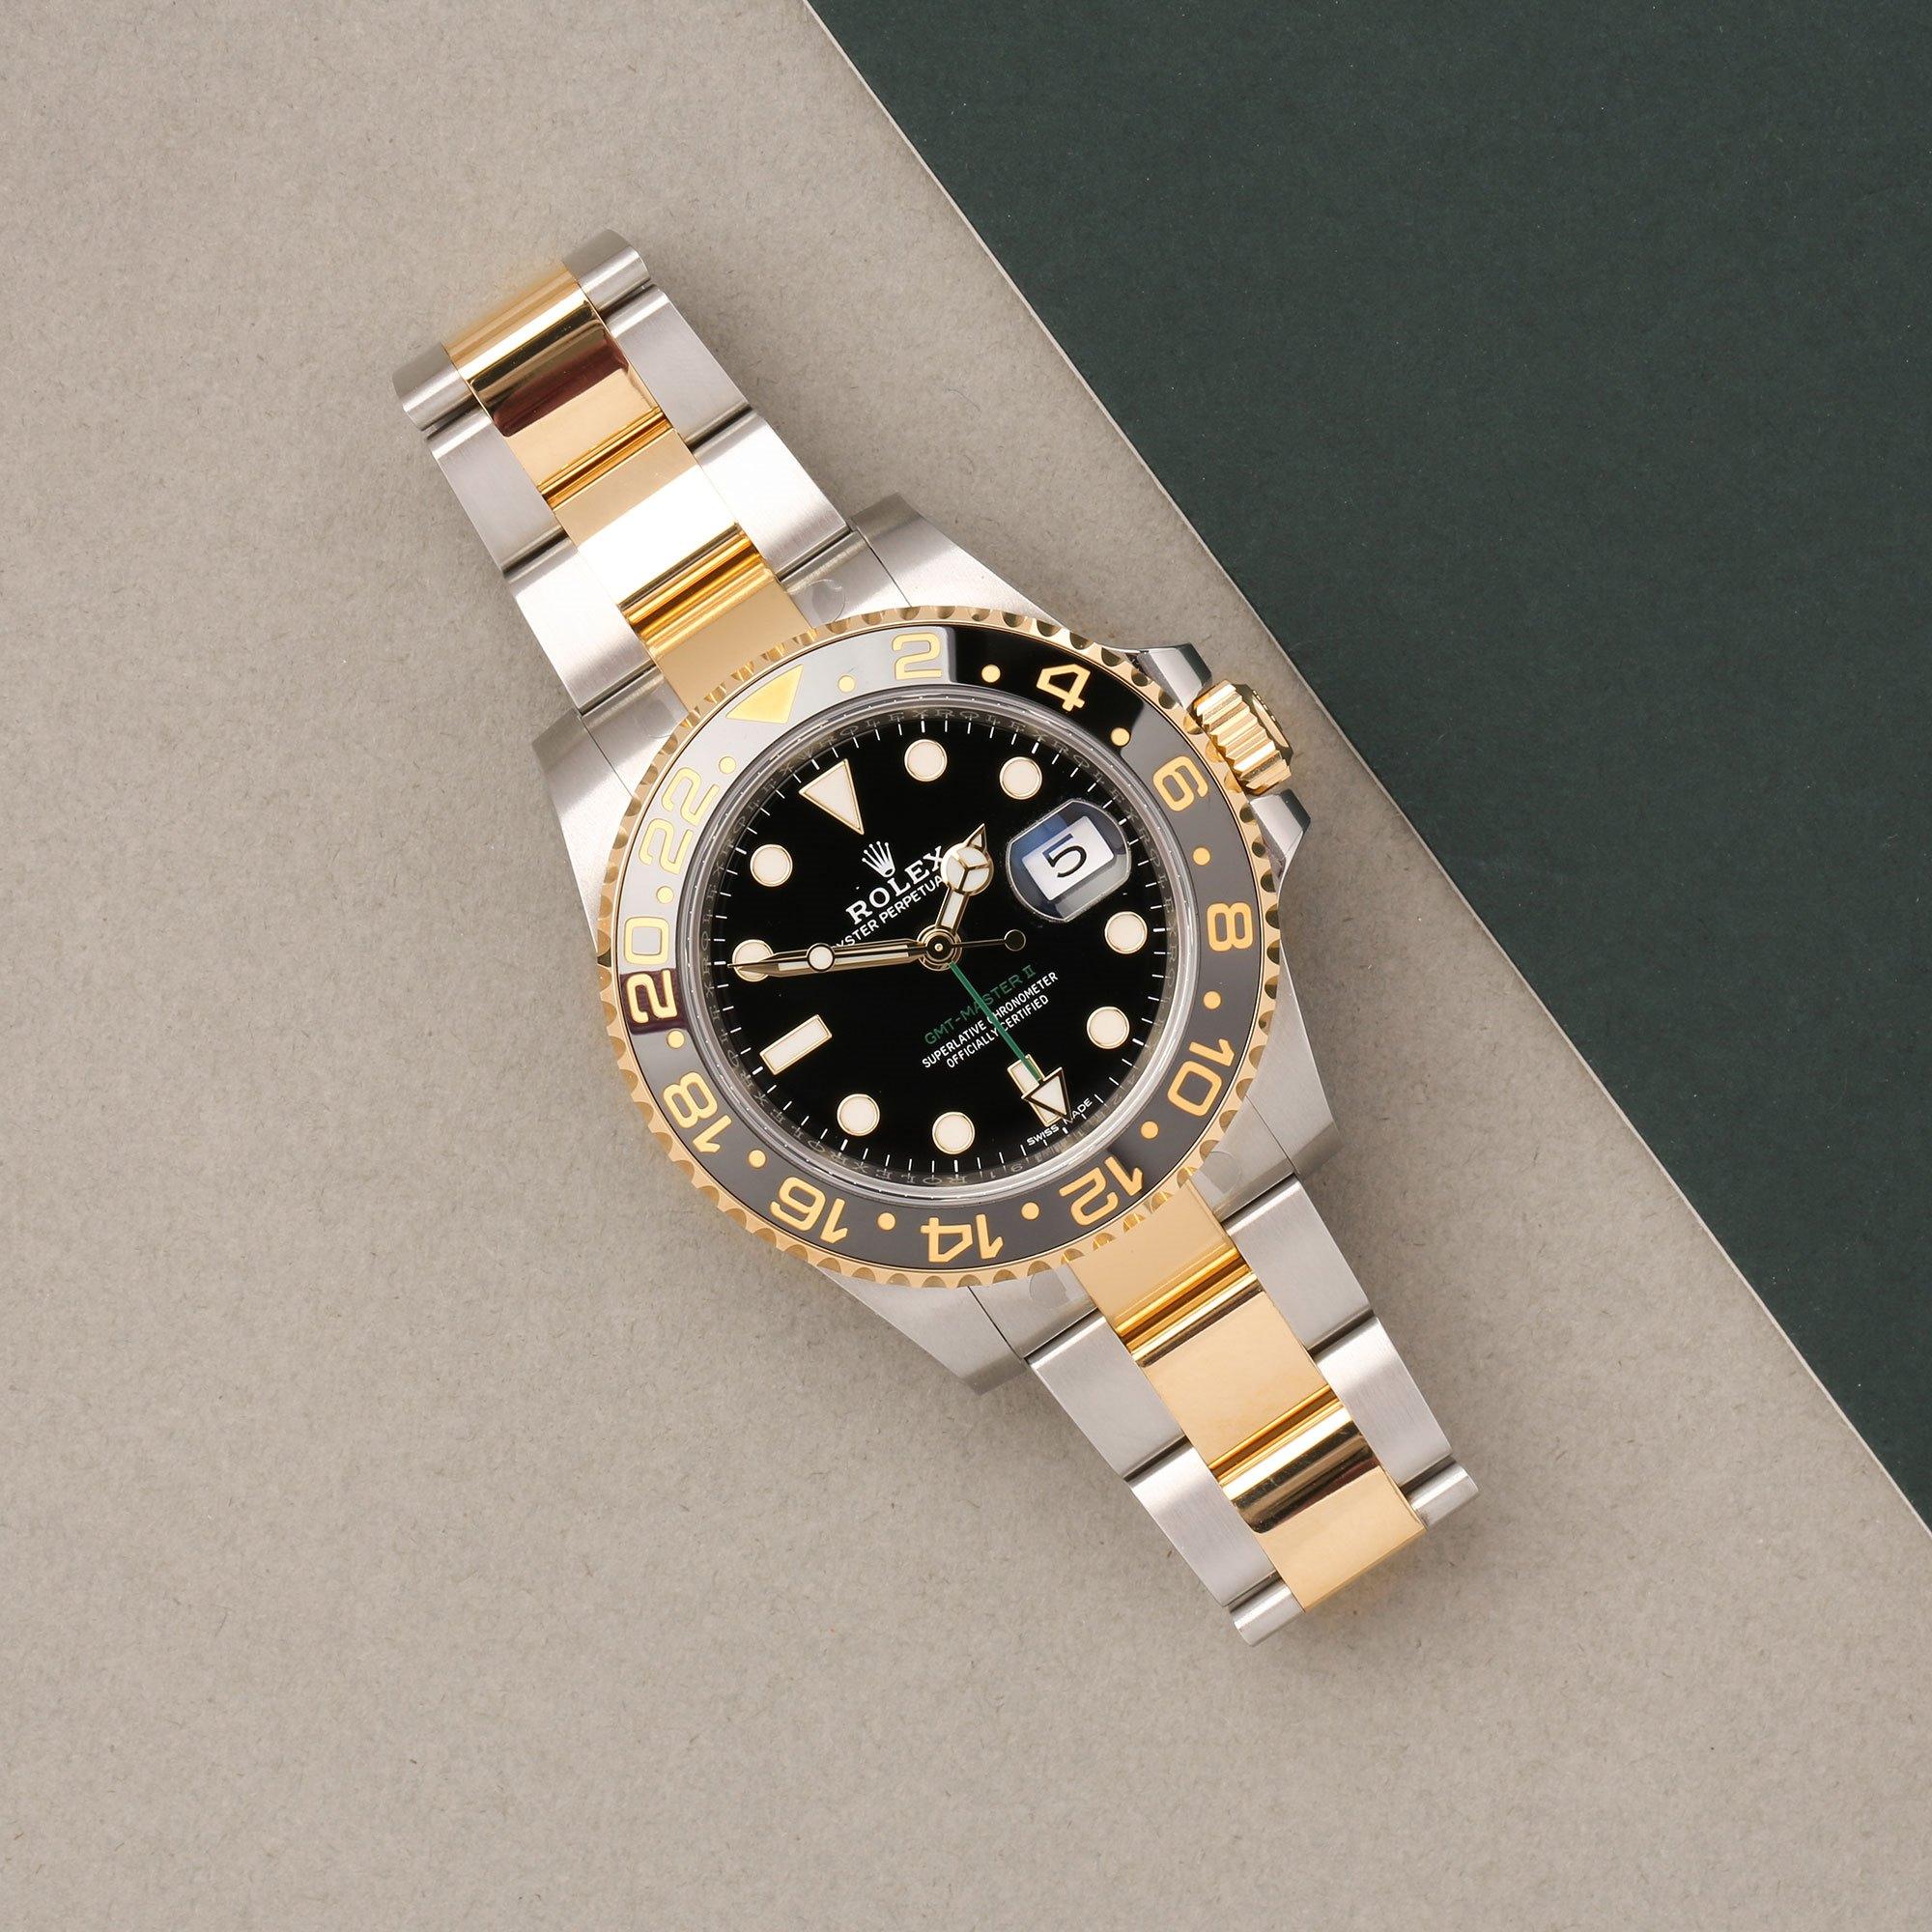 Xupes Reference: COM002709
Manufacturer: Rolex
Model: GMT-Master II
Model Variant: 0
Model Number: 116713LN
Age: 16-02-2019
Gender: Men
Complete With: Rolex Box, Manuals, Card Holder, Swing Tags & Guarantee 
Dial: Black Baton 
Glass: Sapphire